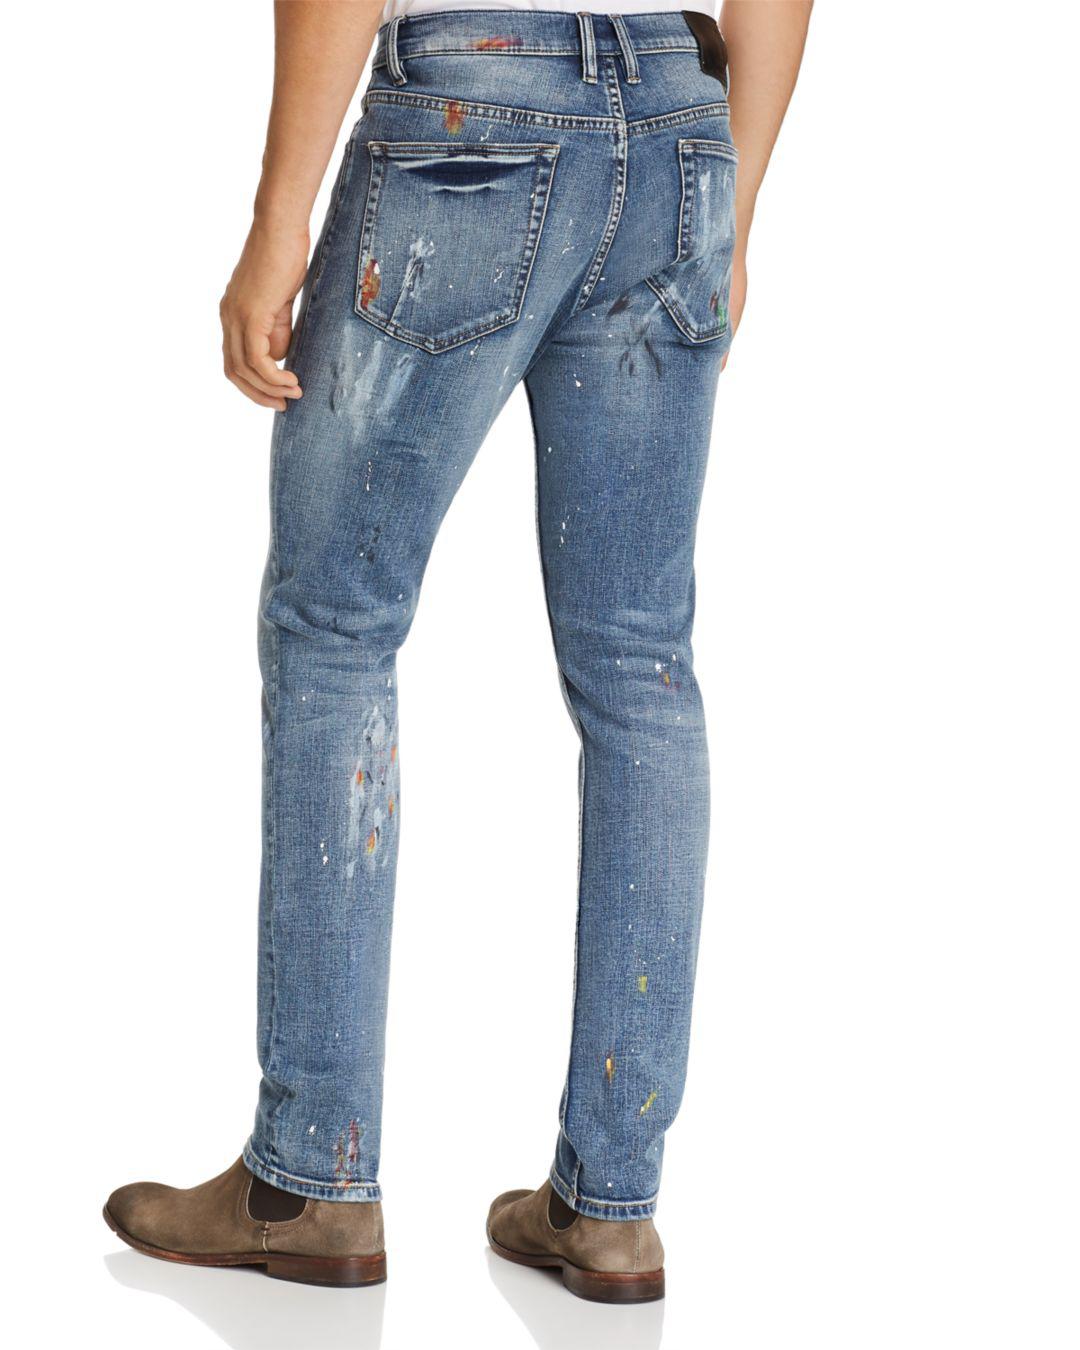 Blank NYC Denim Blankn Horatio Splatter Paint Skinny Fit Jeans In Oh Behave  in Blue for Men - Lyst